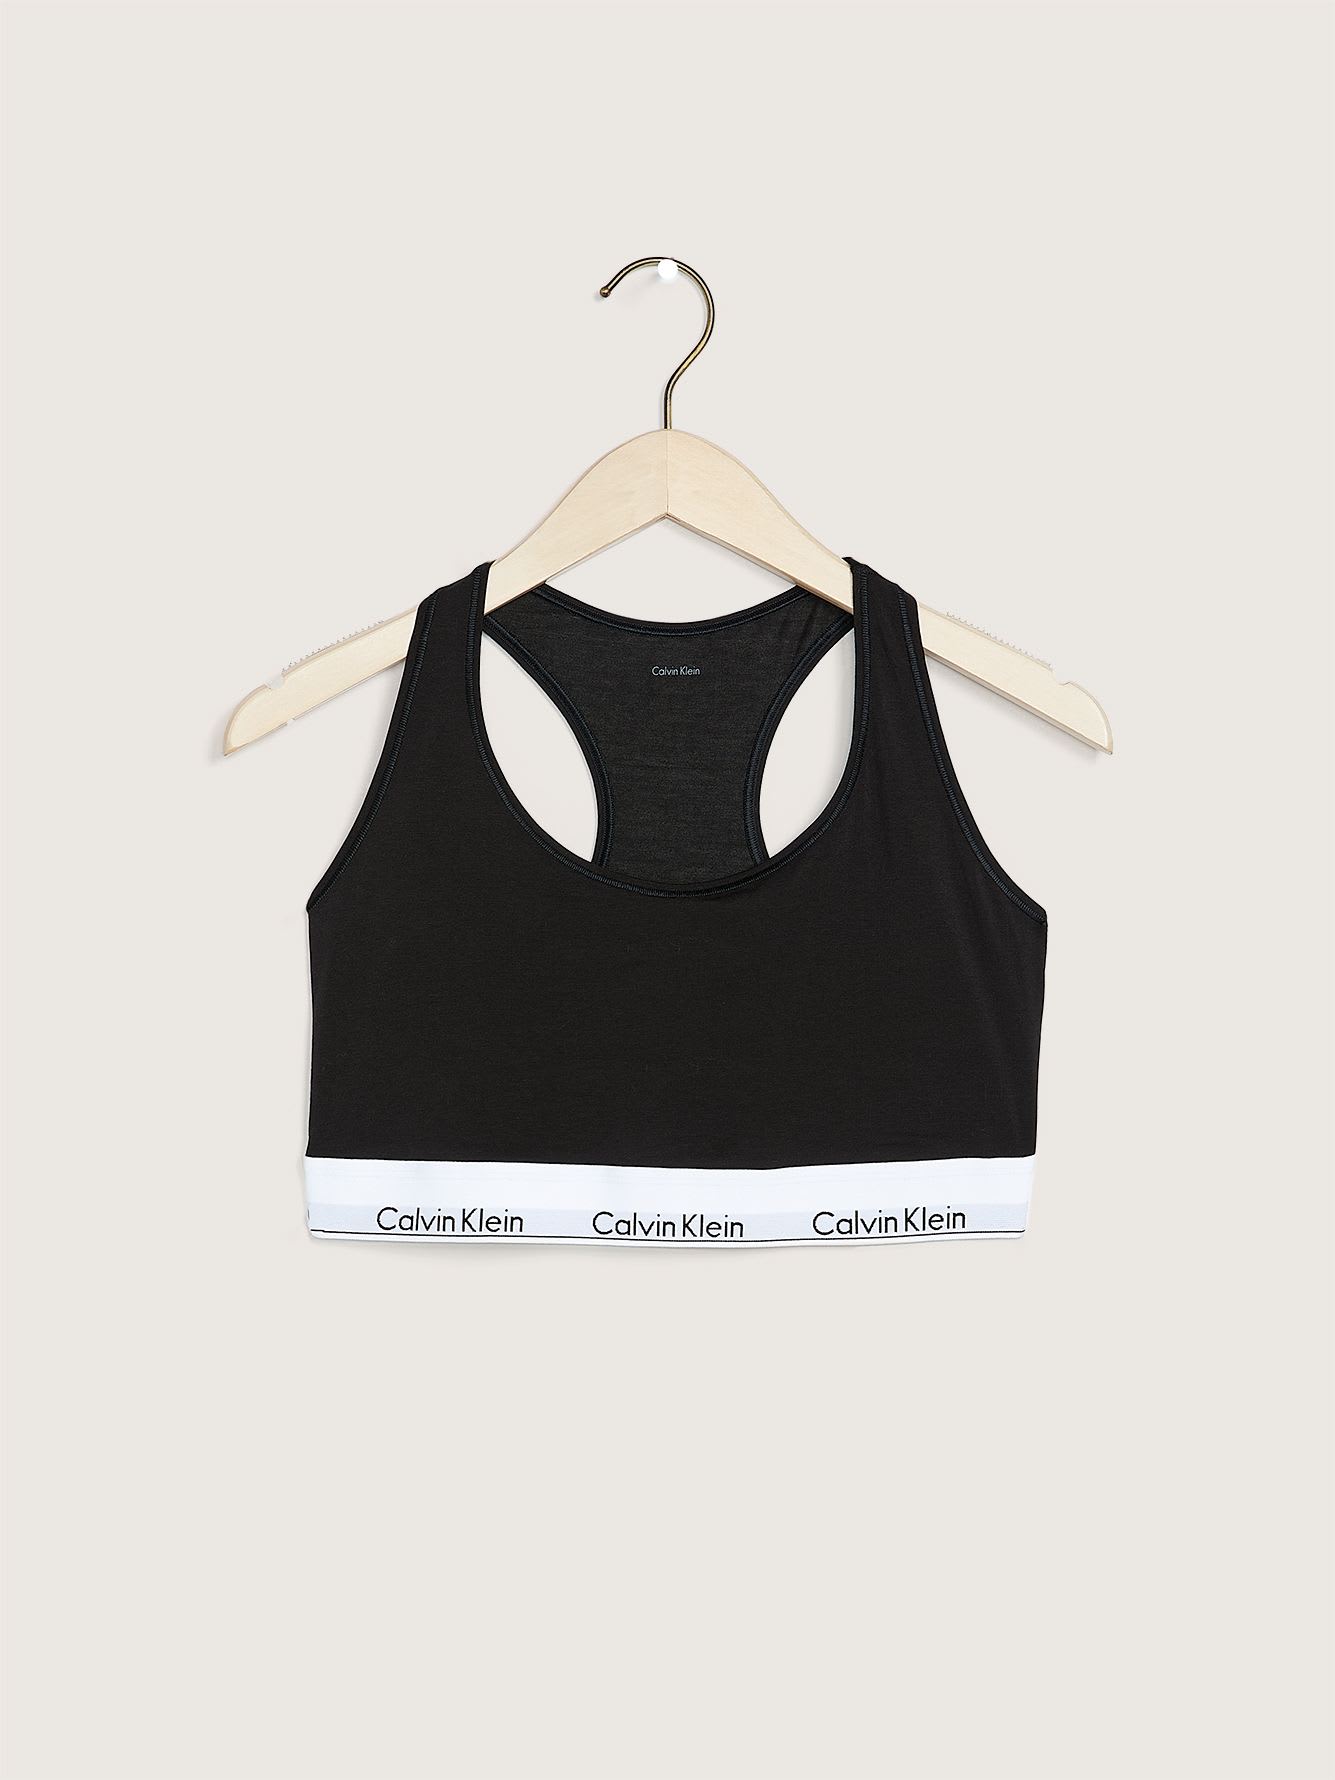 CALVIN KLEIN CK One Cotton Unlined Bralette QF5727 Cut out Print Size Small